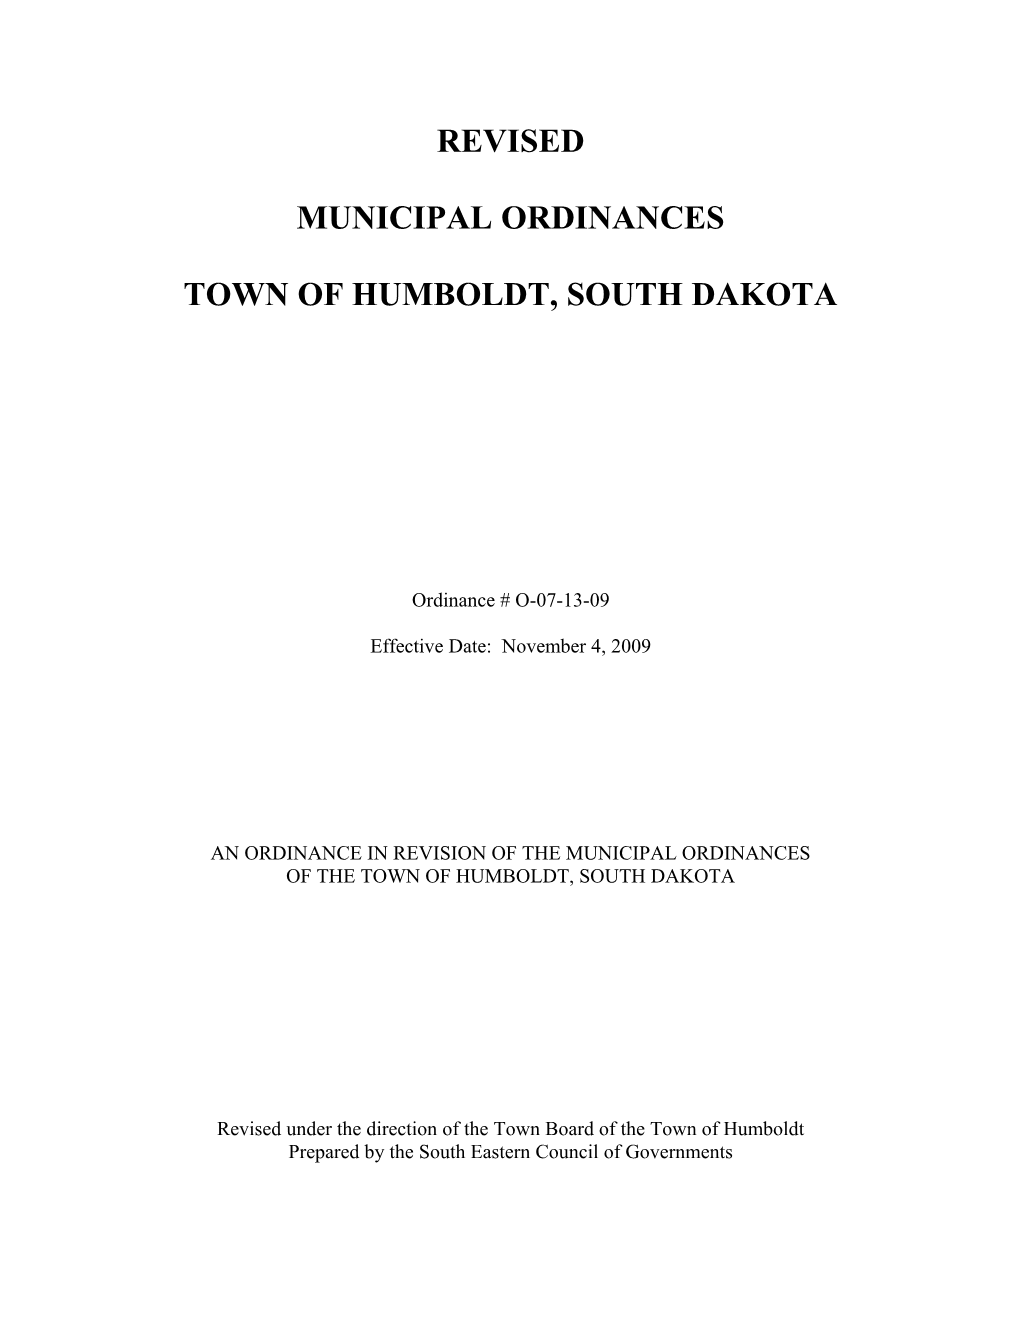 Compiled Ordinances of the Cityof Humboldt